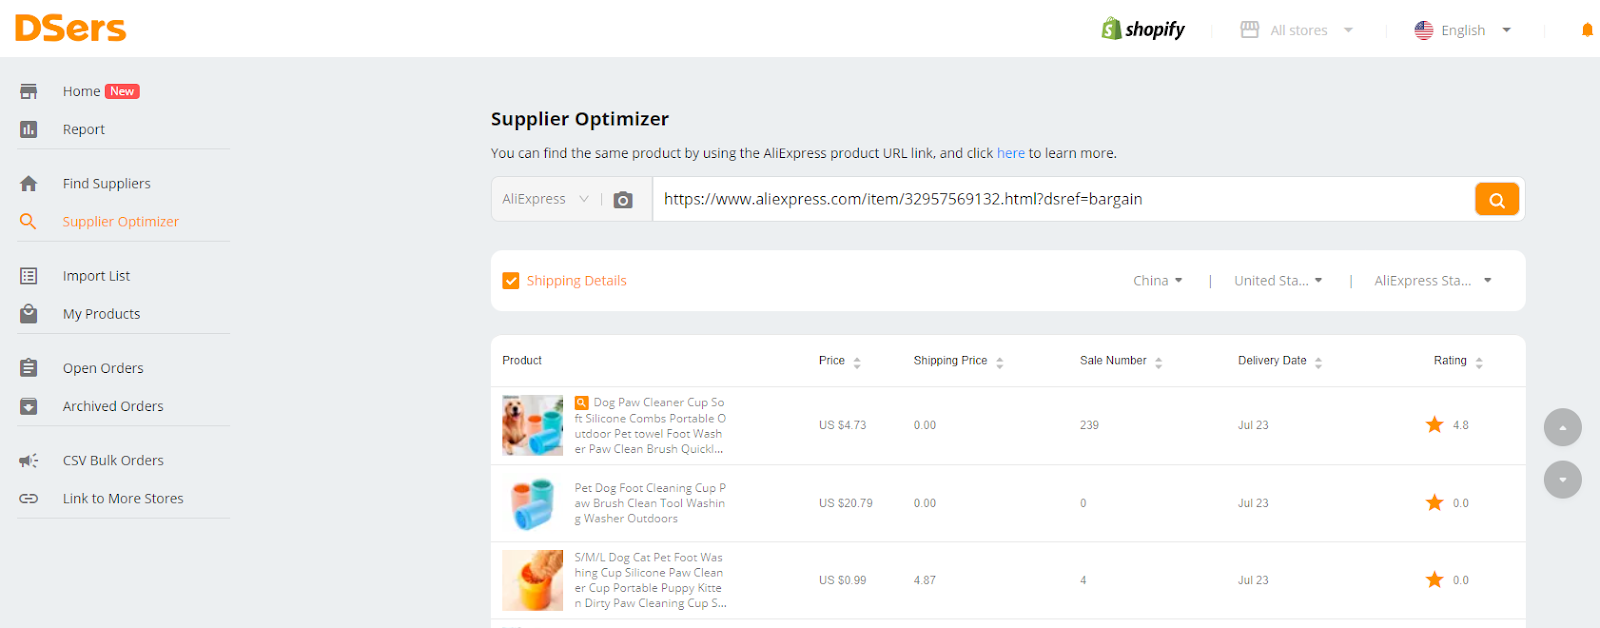 DSers Supplier Optimizer - DSers